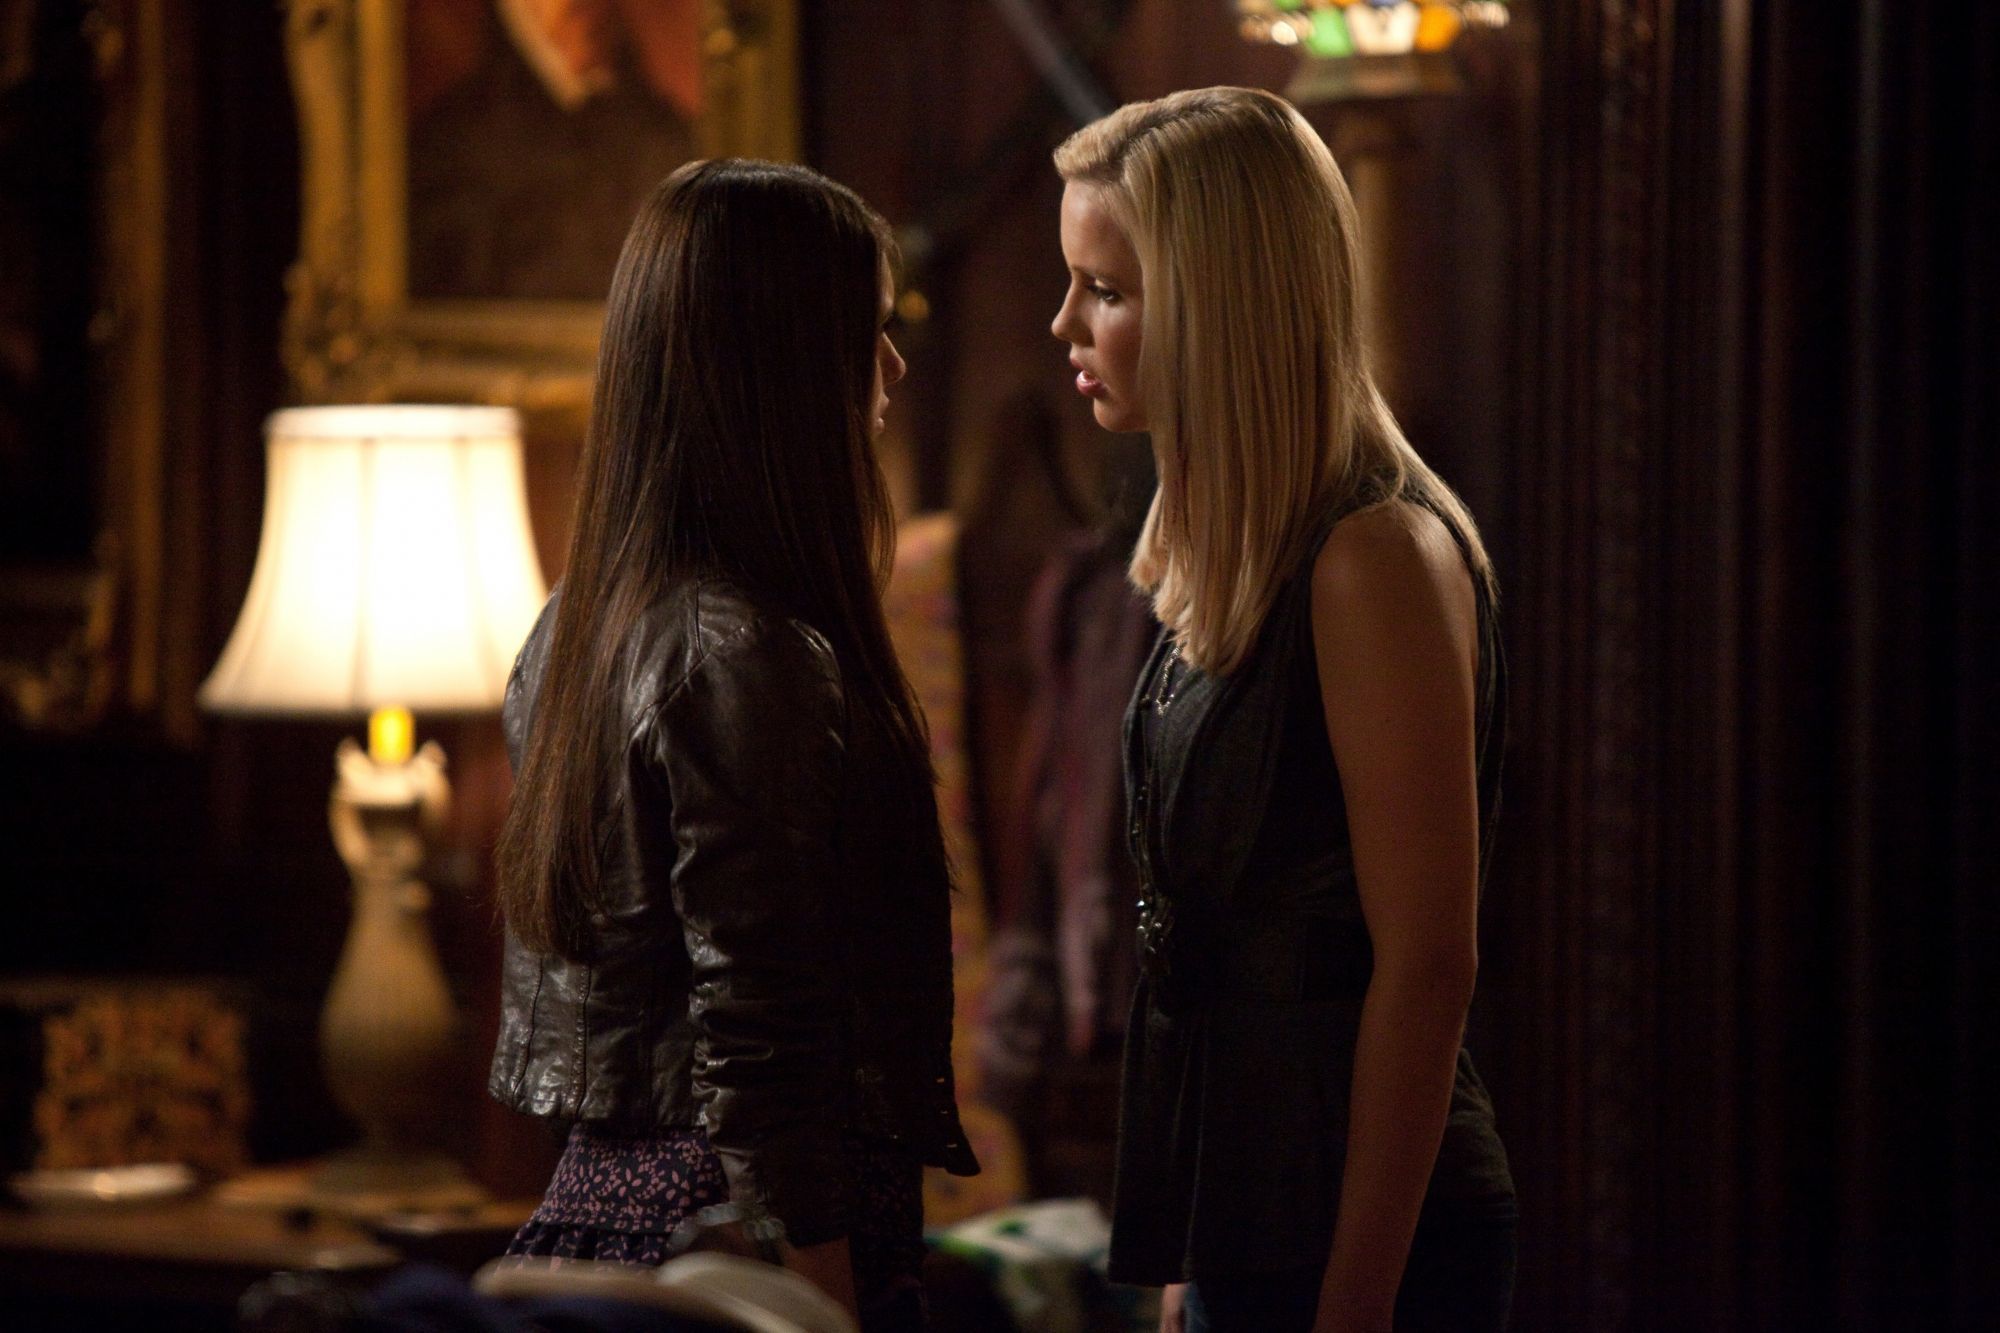 Stefan & Elena images the vampire diaries season 3 HD wallpaper and background photos